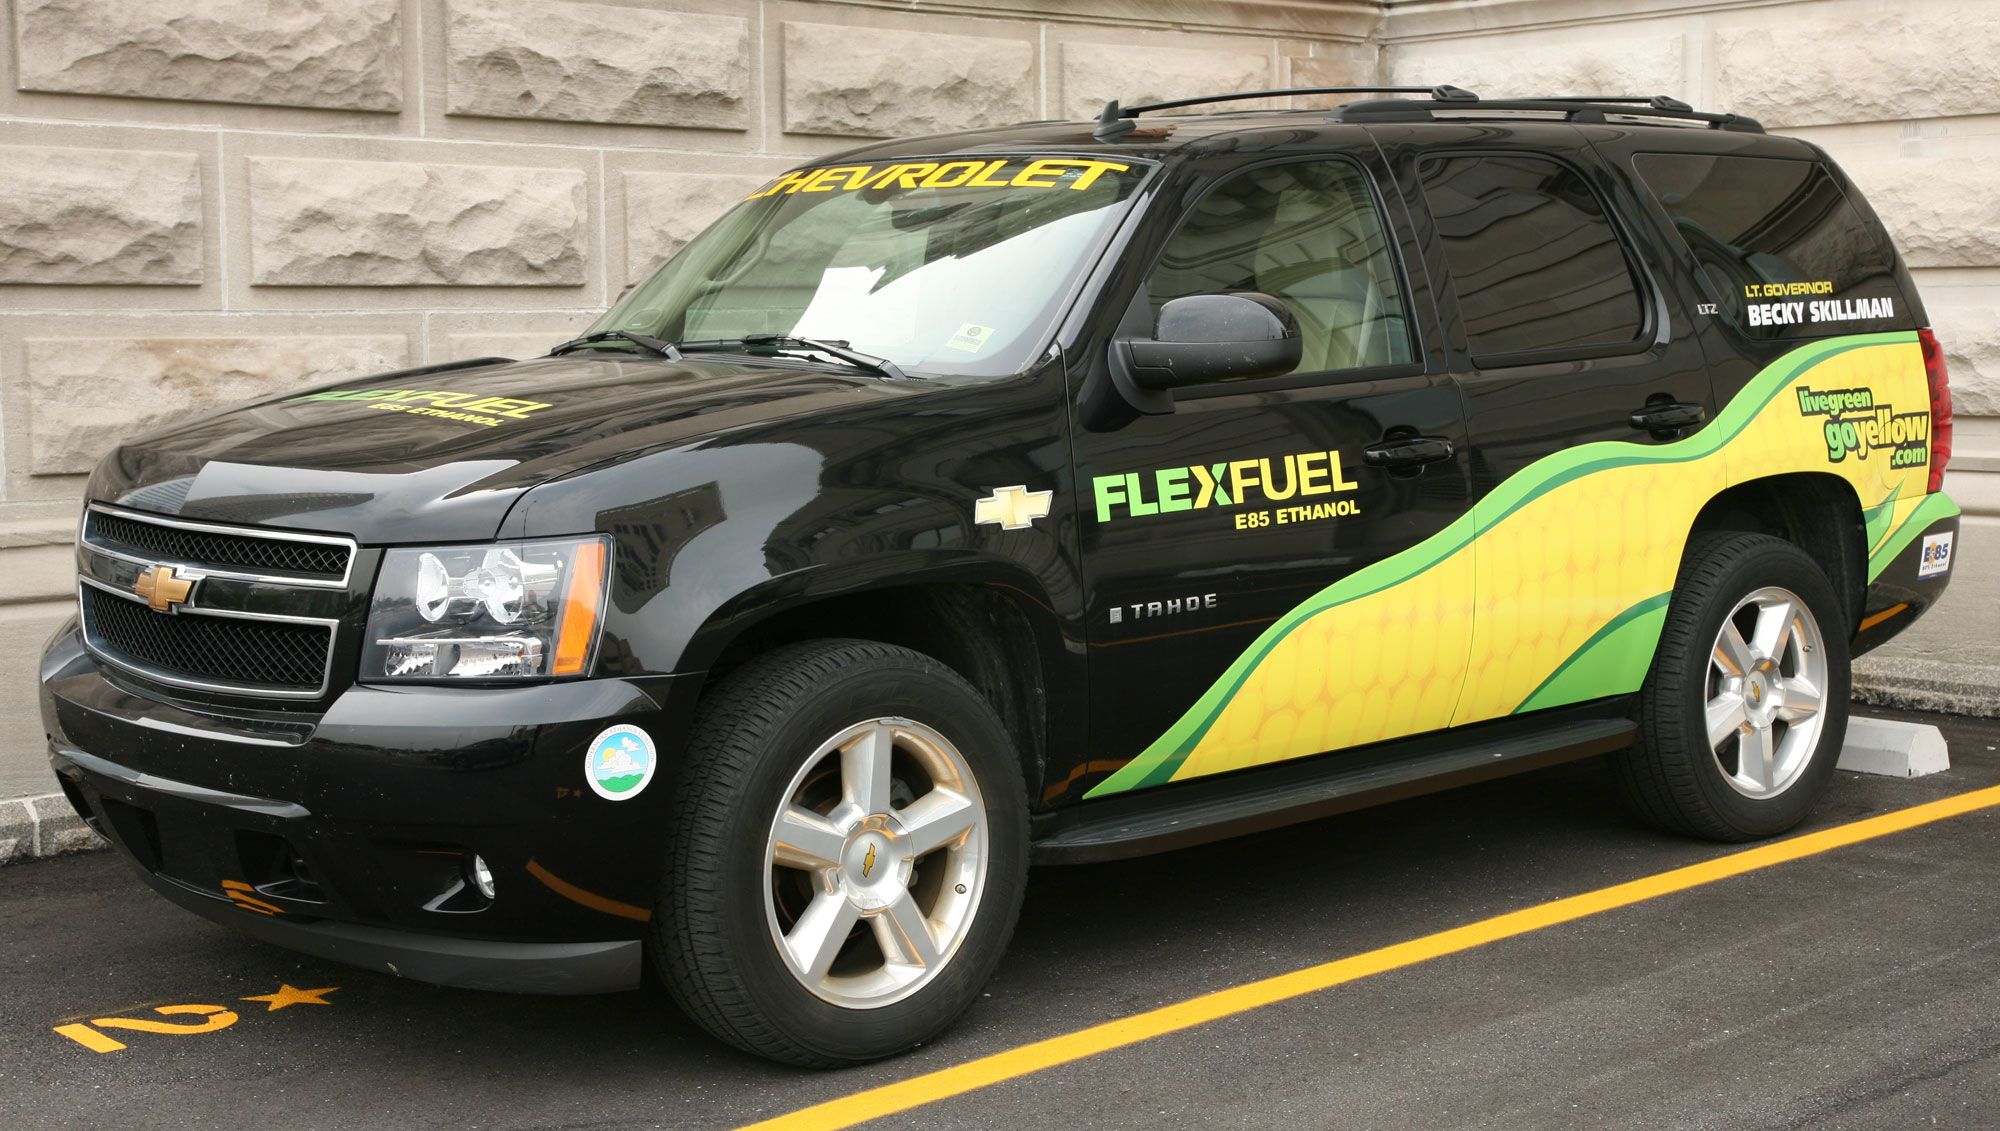 Photograph of an SUV that can run on E85 fuel The photo shows a black Chevy Tahoe with a stylized ear of maize painted on the side. It says "Flexfuel E85 Ethanol" on the side, as well as "livegreengoyellow.com." 